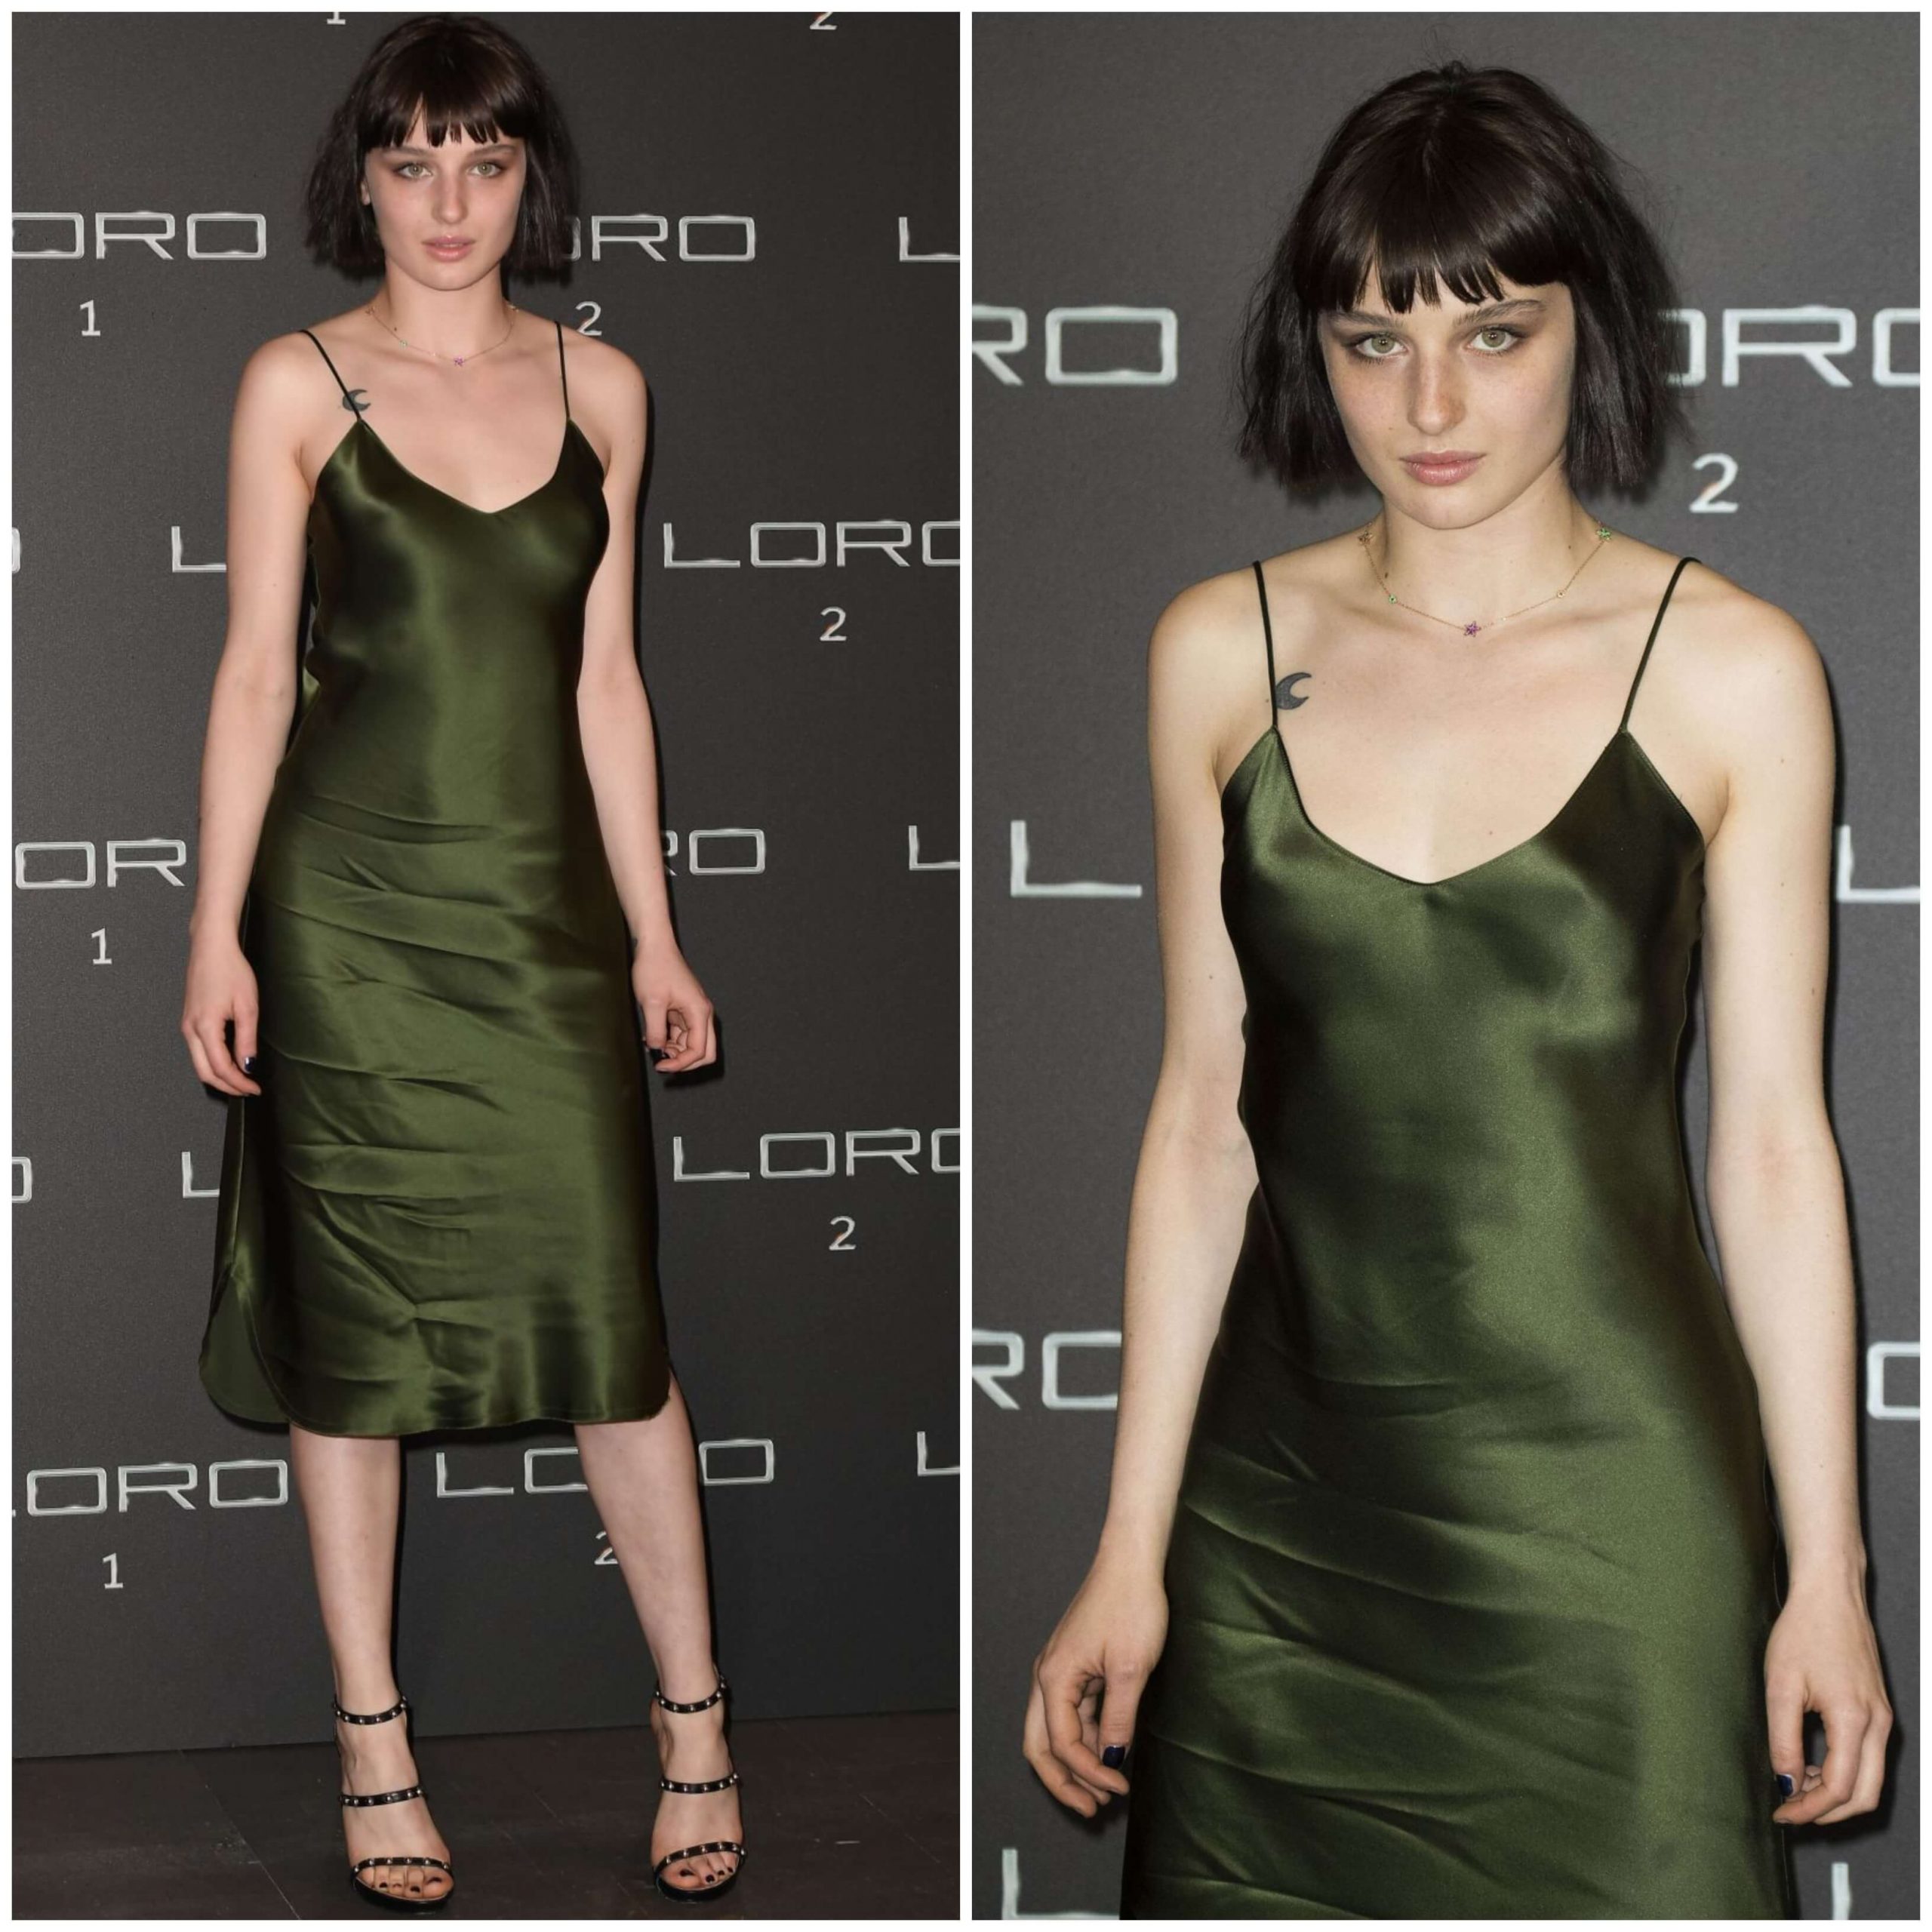 Alice Pagani In Satin Green Outfit At “Loro 2” Photocall in Rome